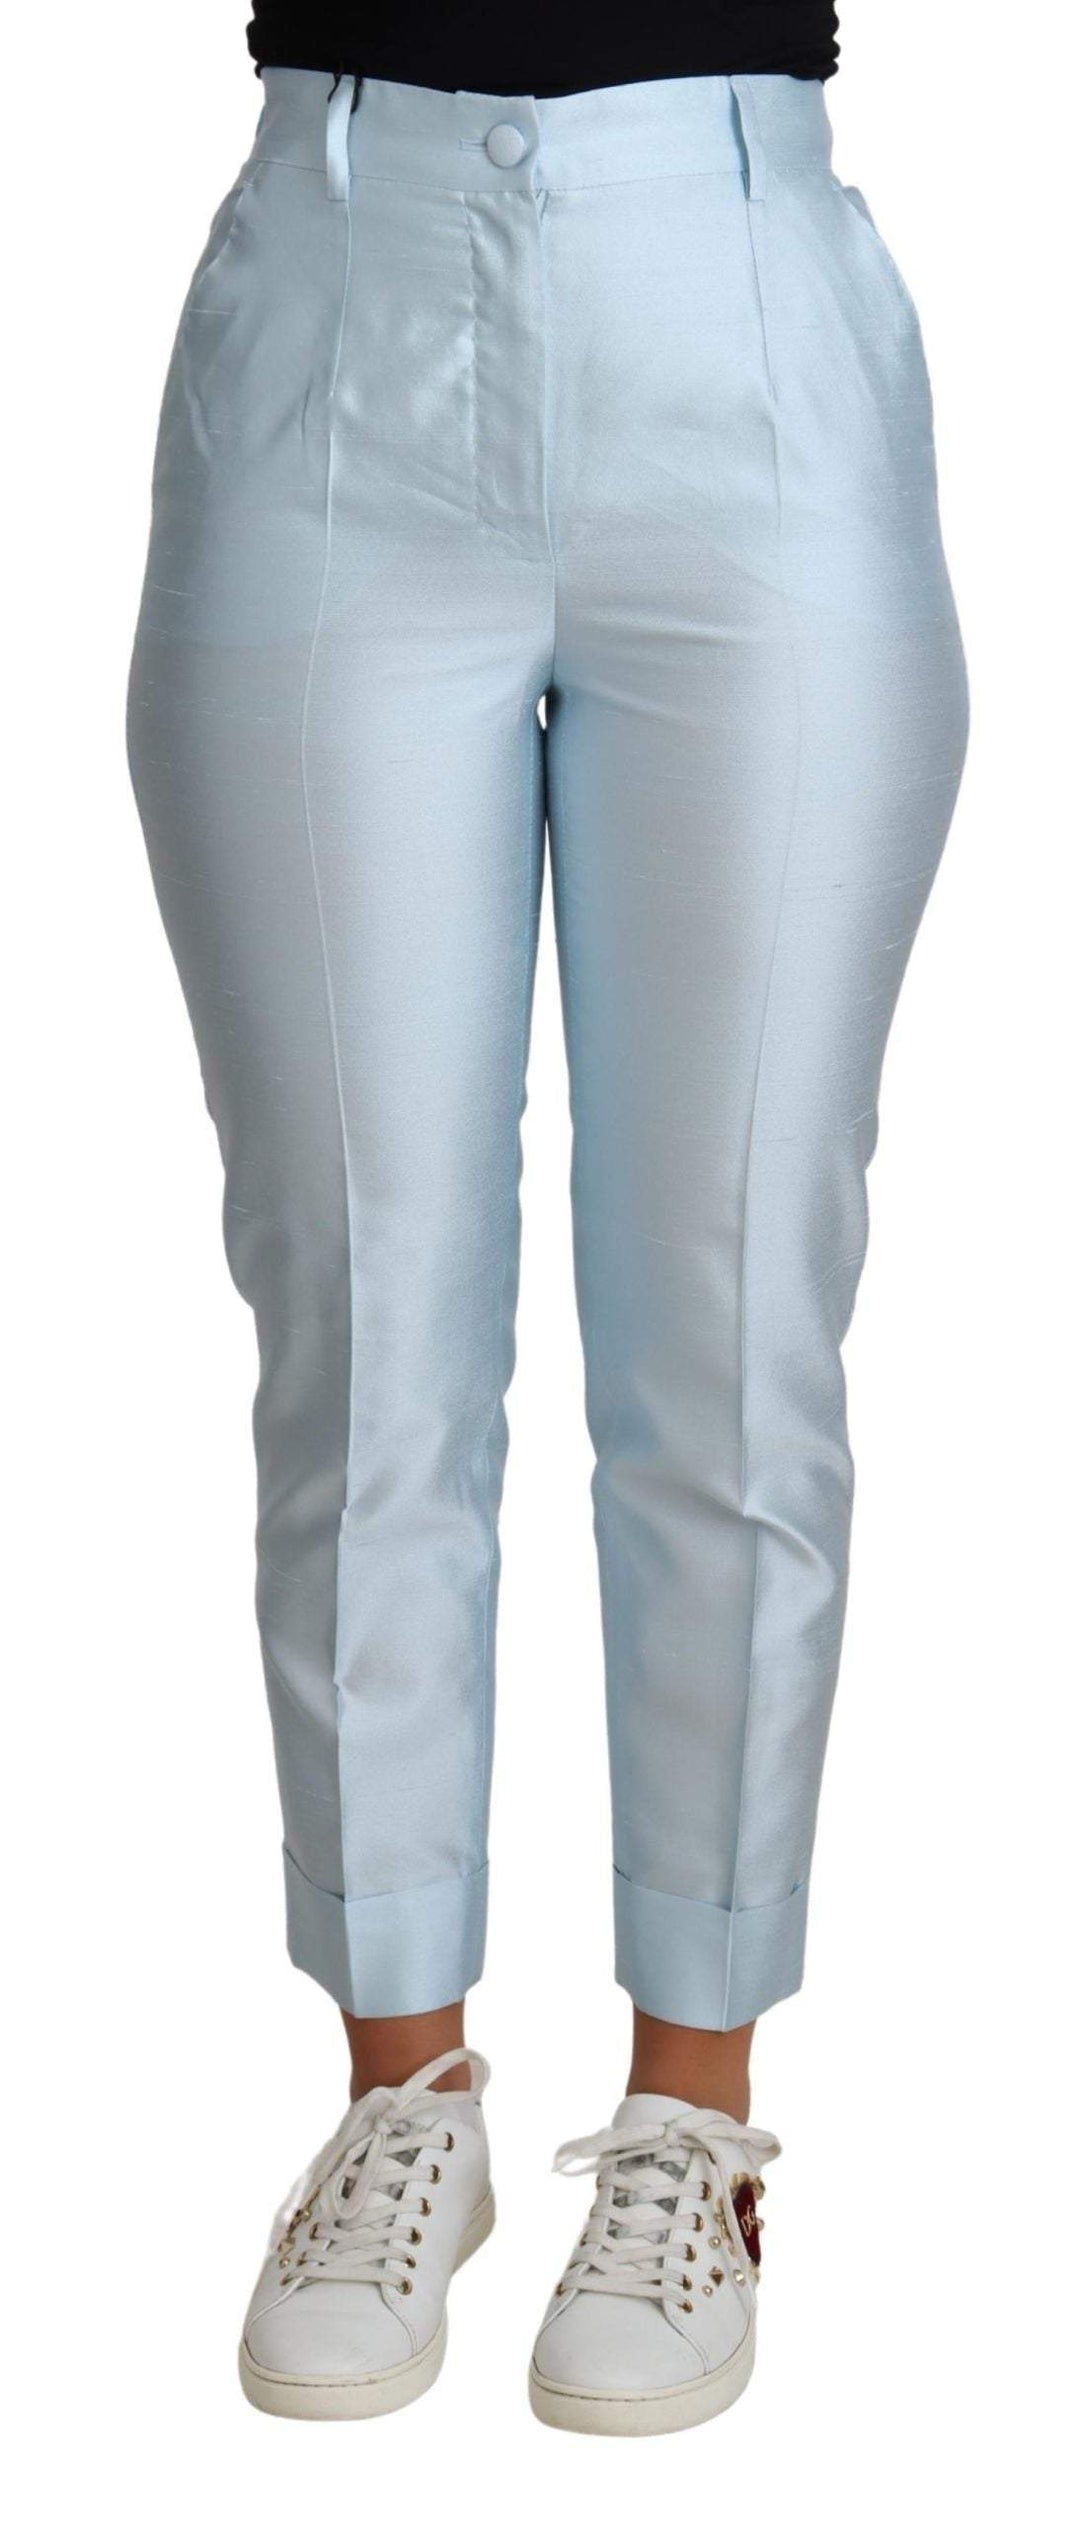 Dolce & Gabbana Light Blue Silk Cropped Tapered Trouser Pants #women, Dolce & Gabbana, feed-agegroup-adult, feed-color-Blue, feed-gender-female, IT38|XS, Jeans & Pants - Women - Clothing, Light Blue, Women - New Arrivals at SEYMAYKA